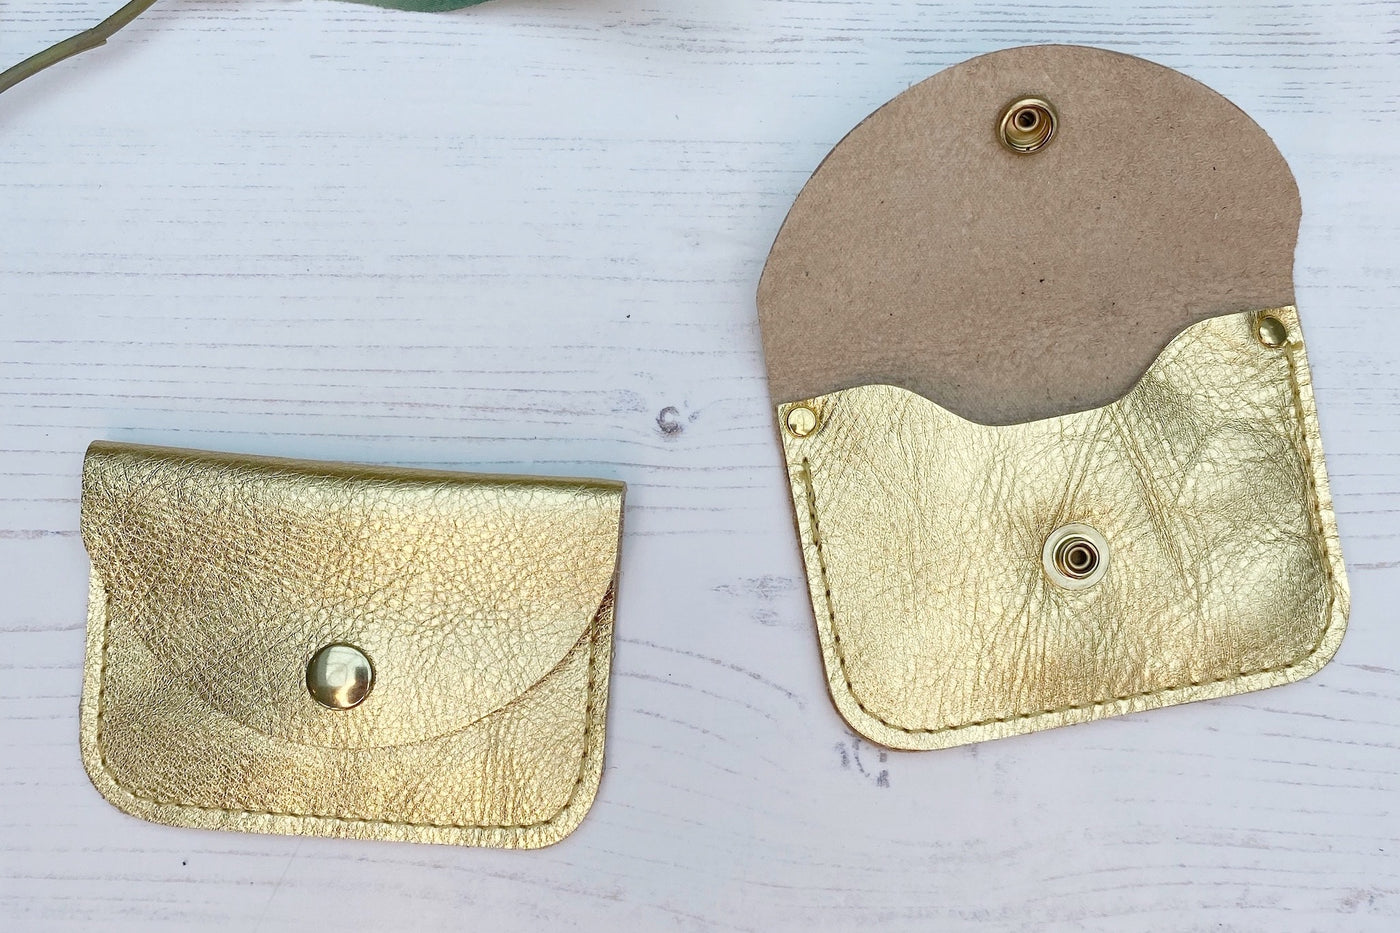 Leather Coin Purse Pattern – Leather Bag Pattern